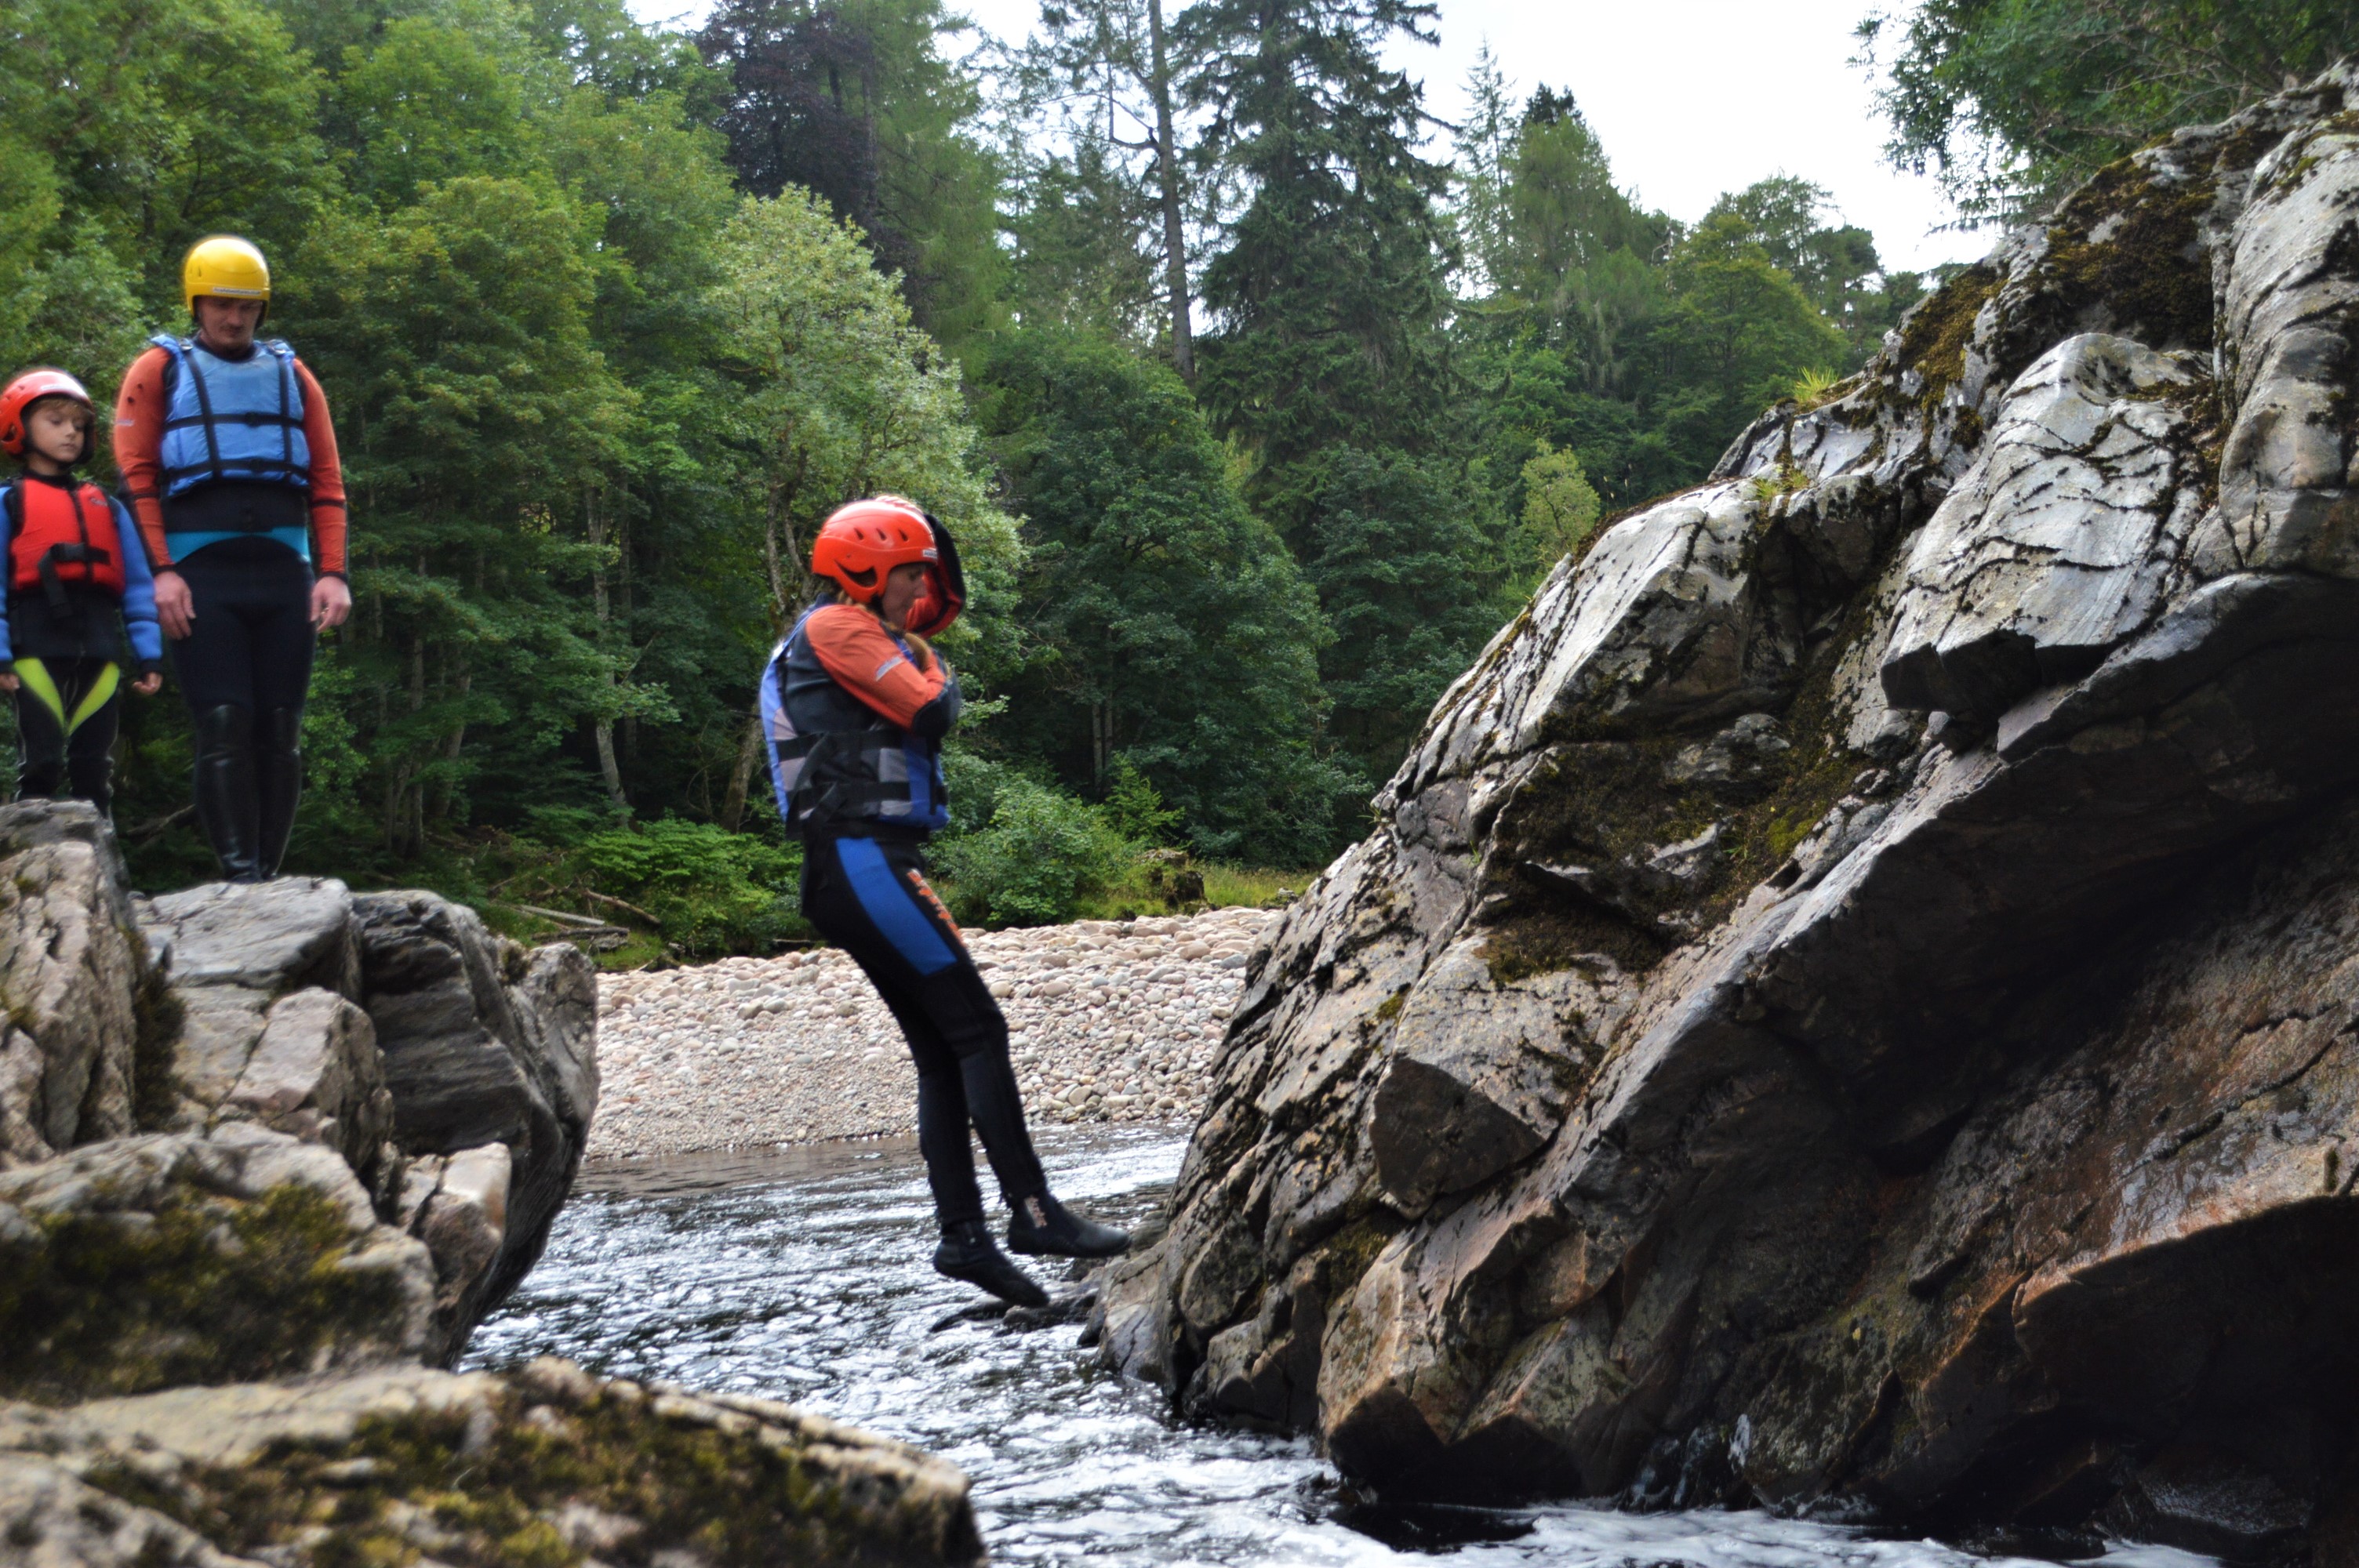 Cliff Jumping at Randolph's Leap on the River Findhorn, Scotland